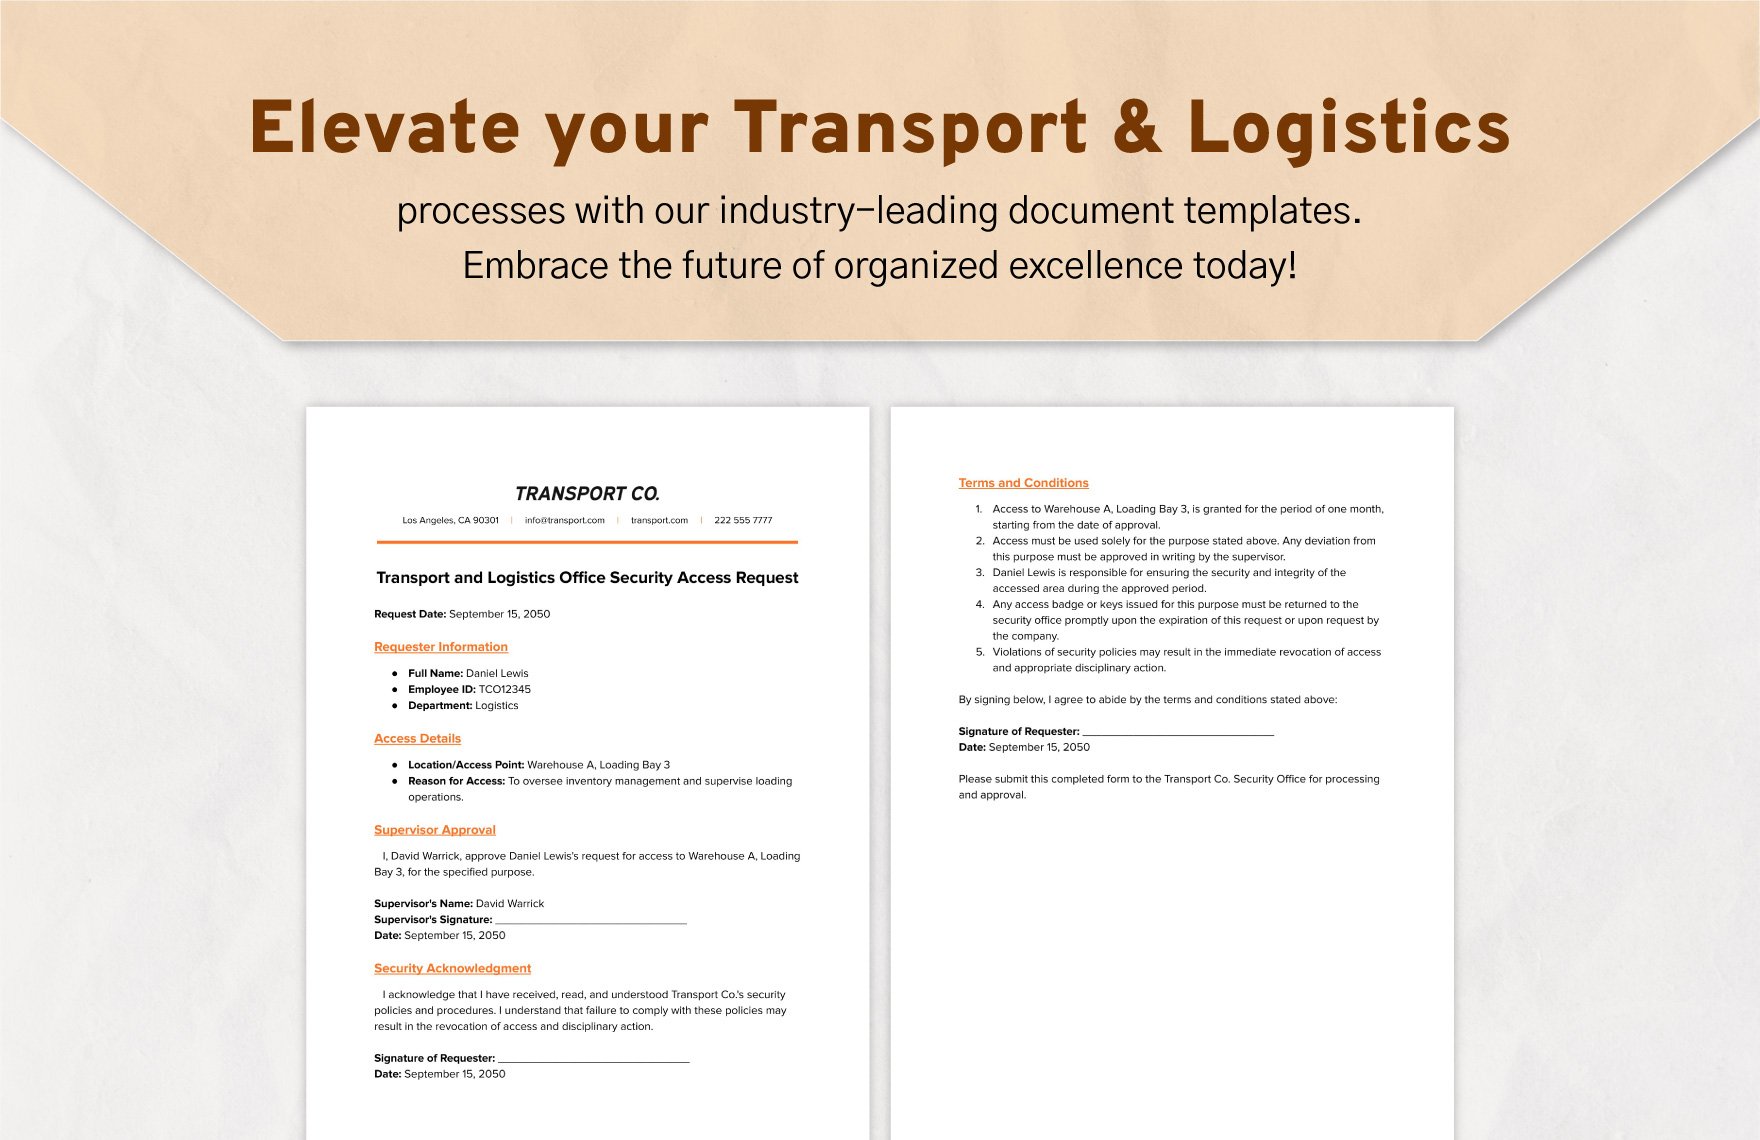 Transport and Logistics Office Security Access Request Template